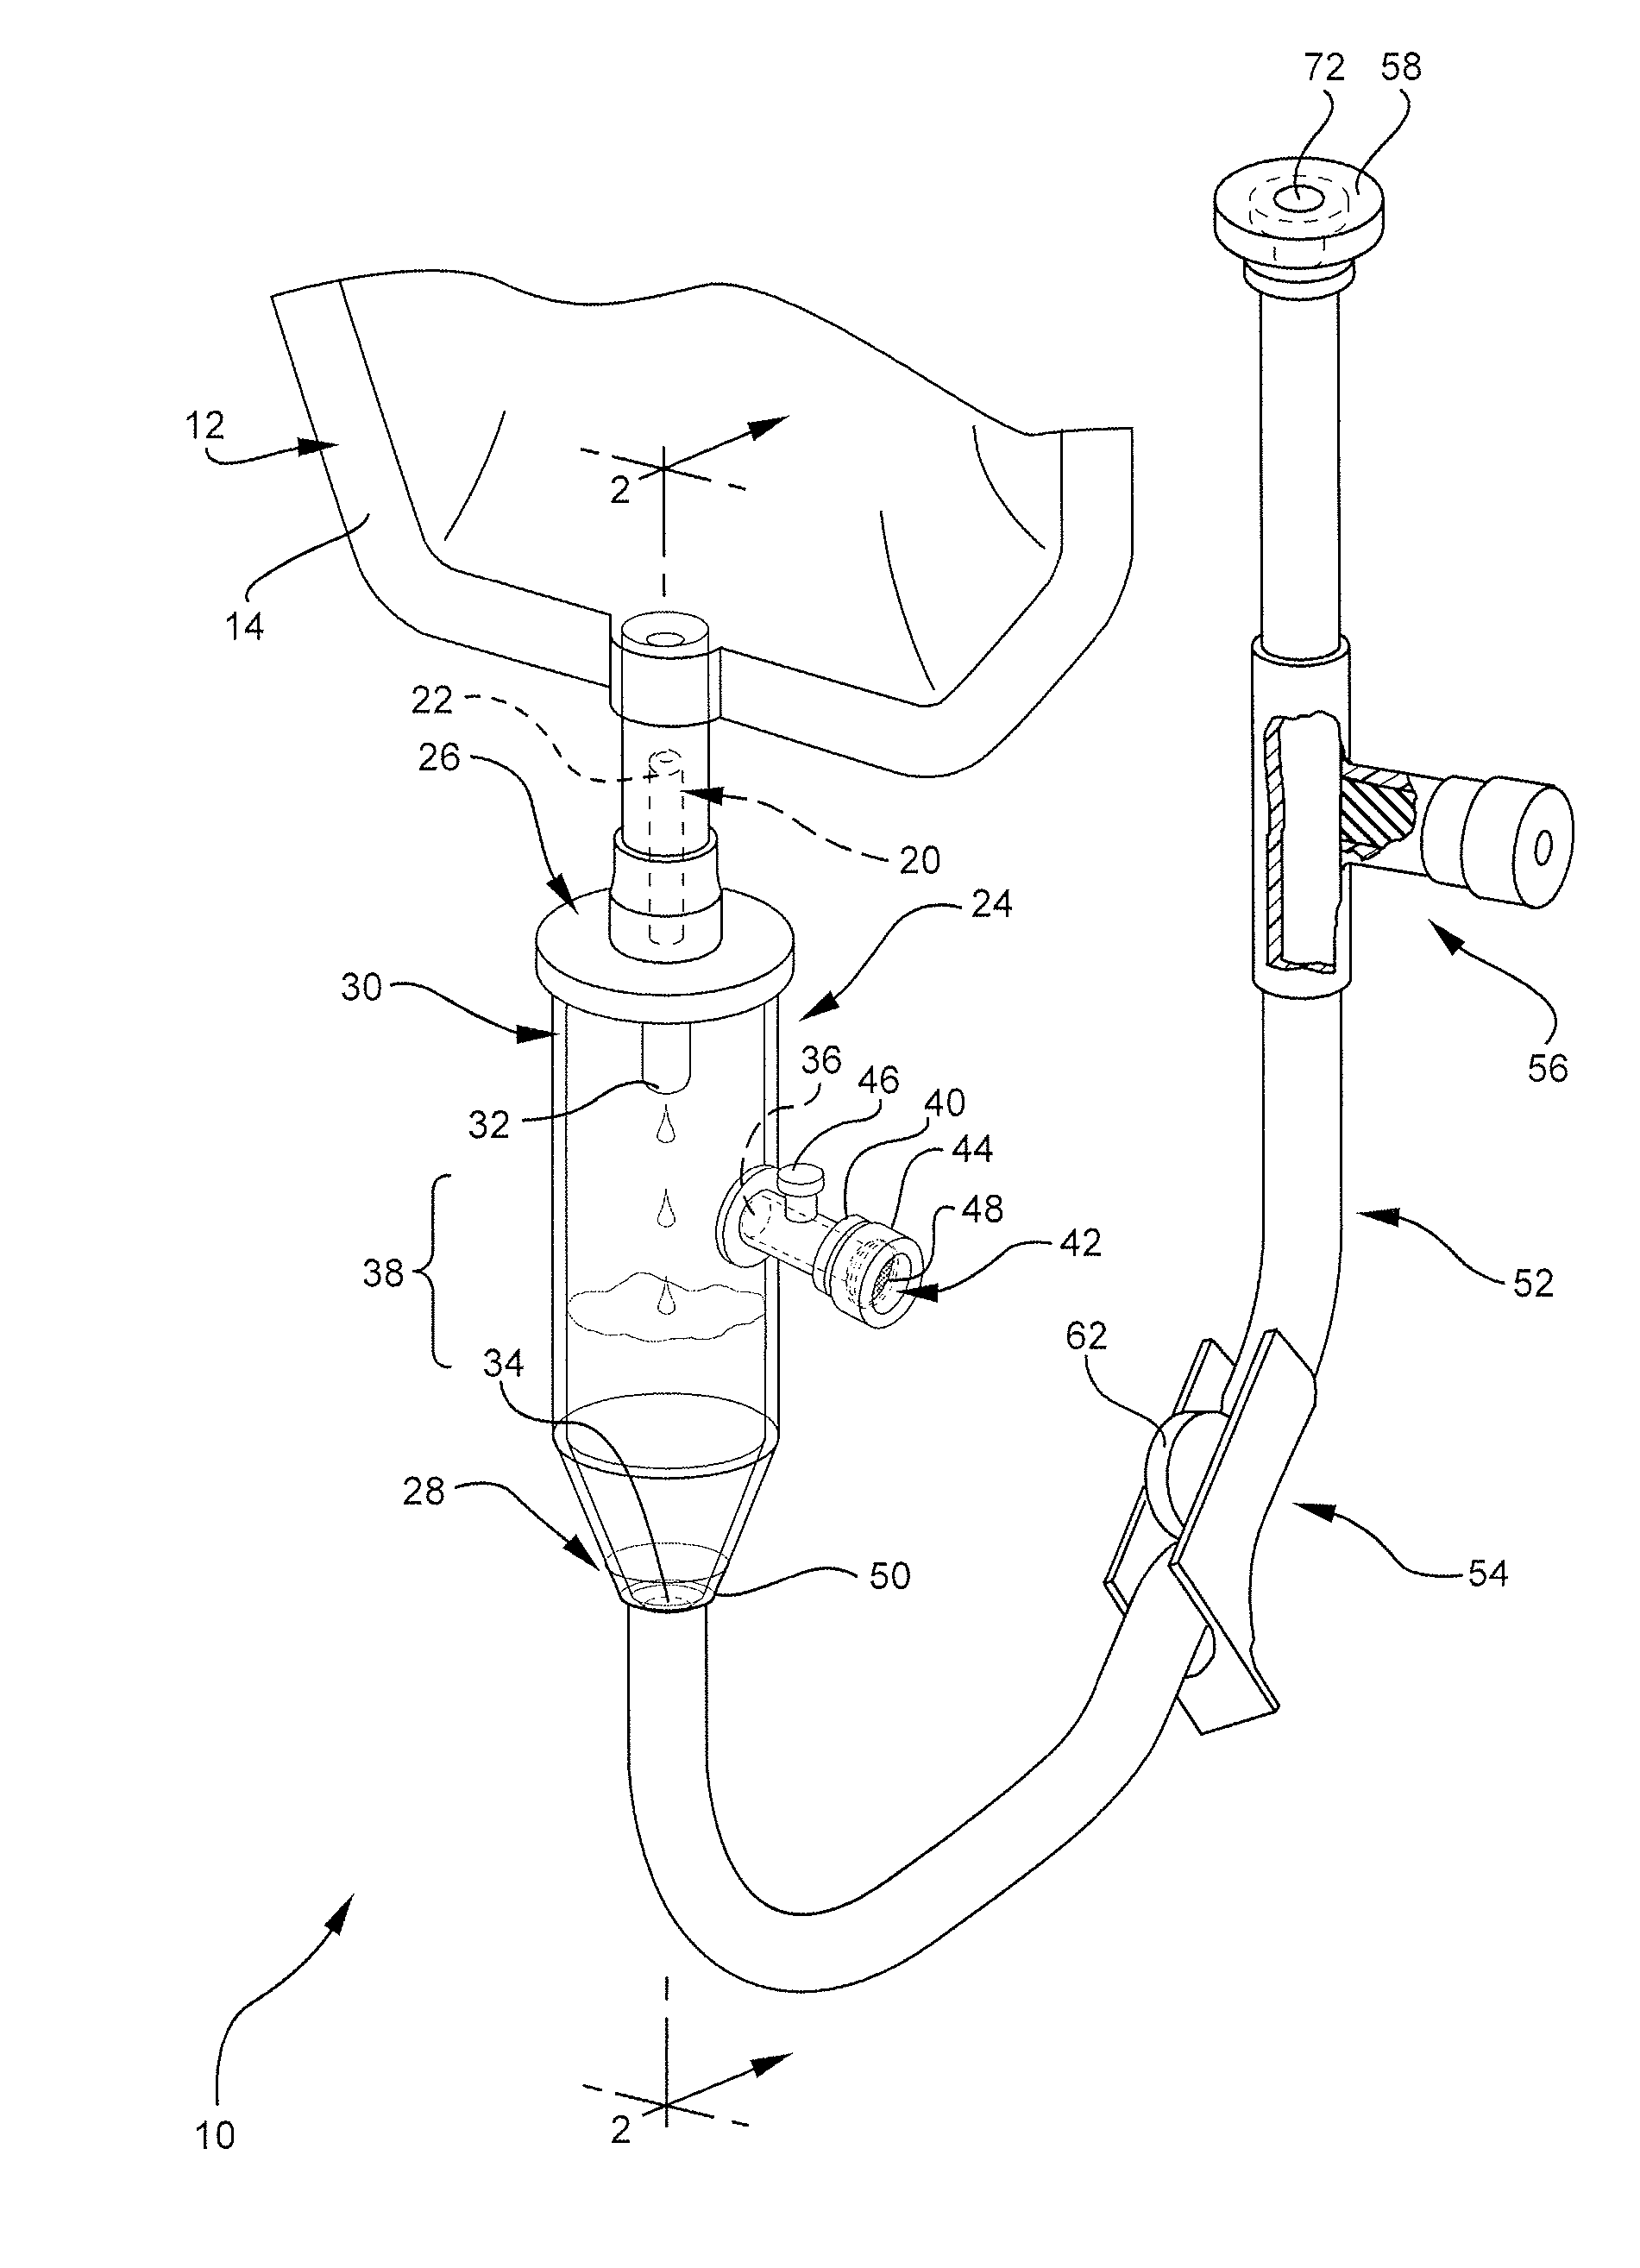 Self priming intravenous delivery system